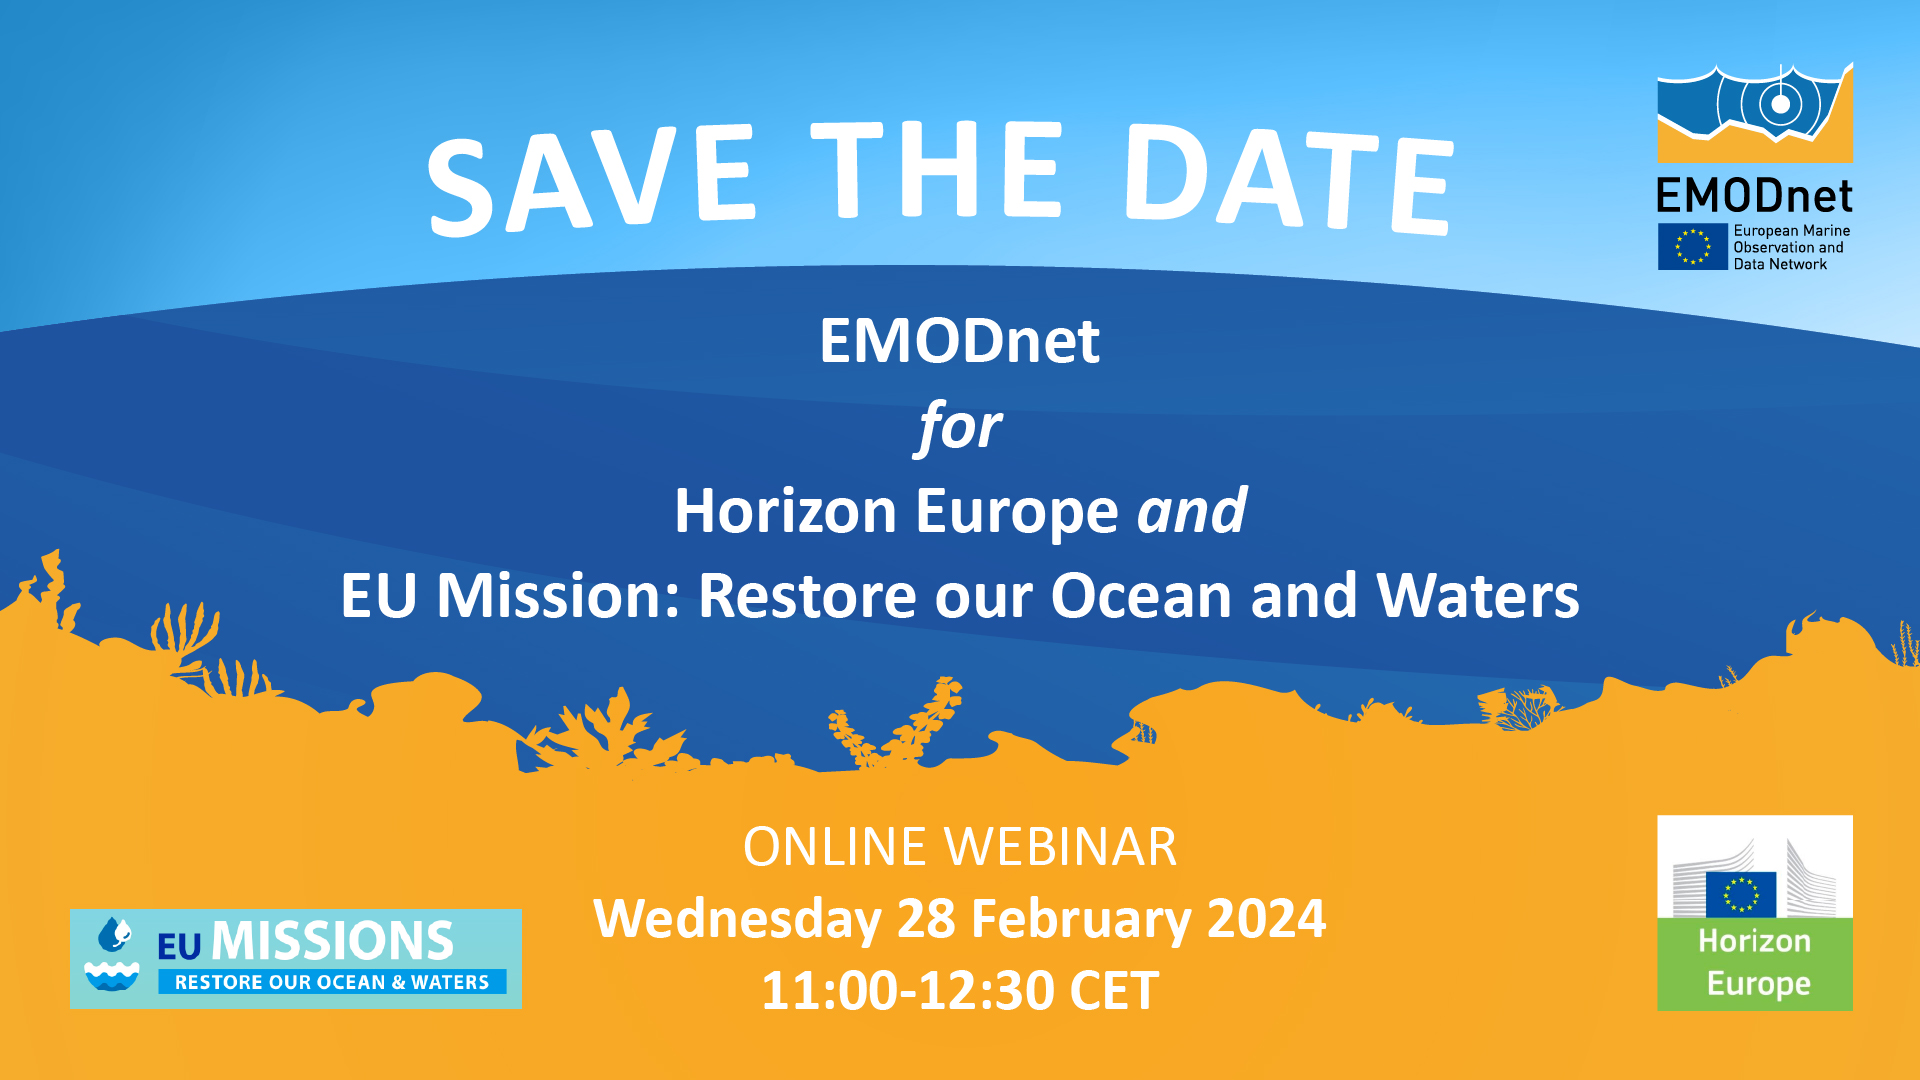 EMODnet for Horizon Europe and Mission Restore Our Ocean and Waters Webinar